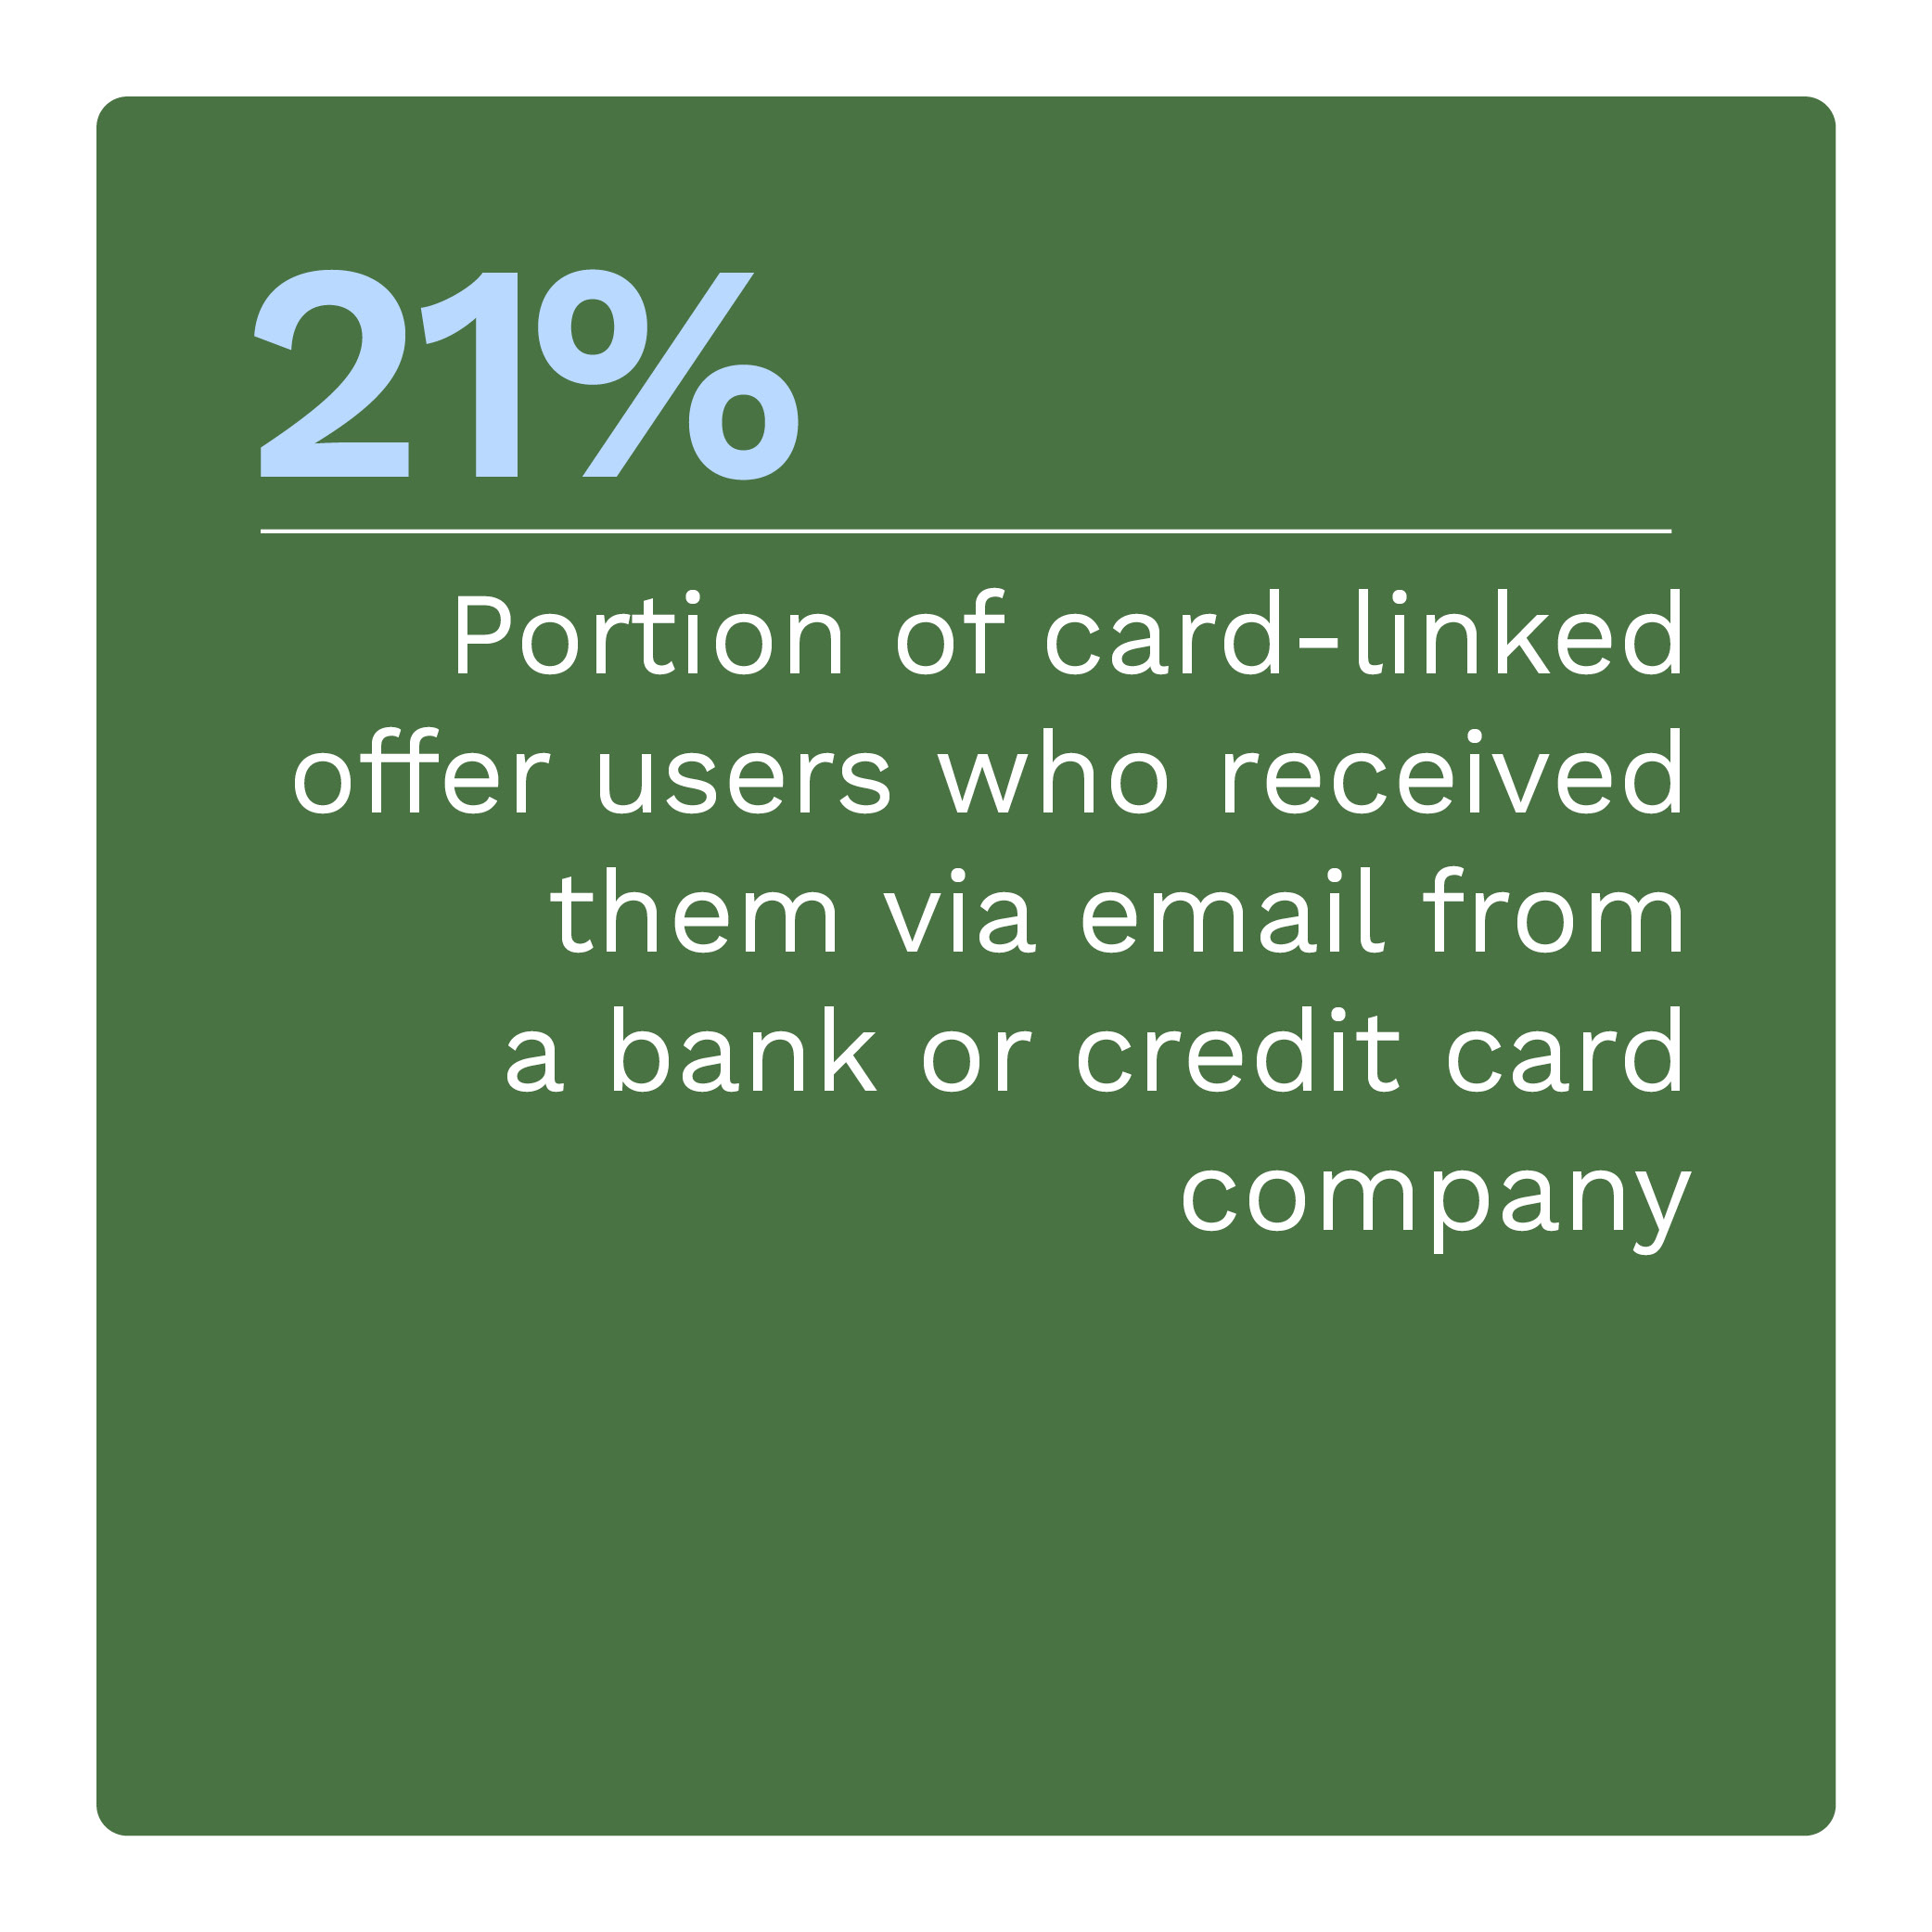 21%: Portion of card-linked offer users who received them via email from a bank or credit card company